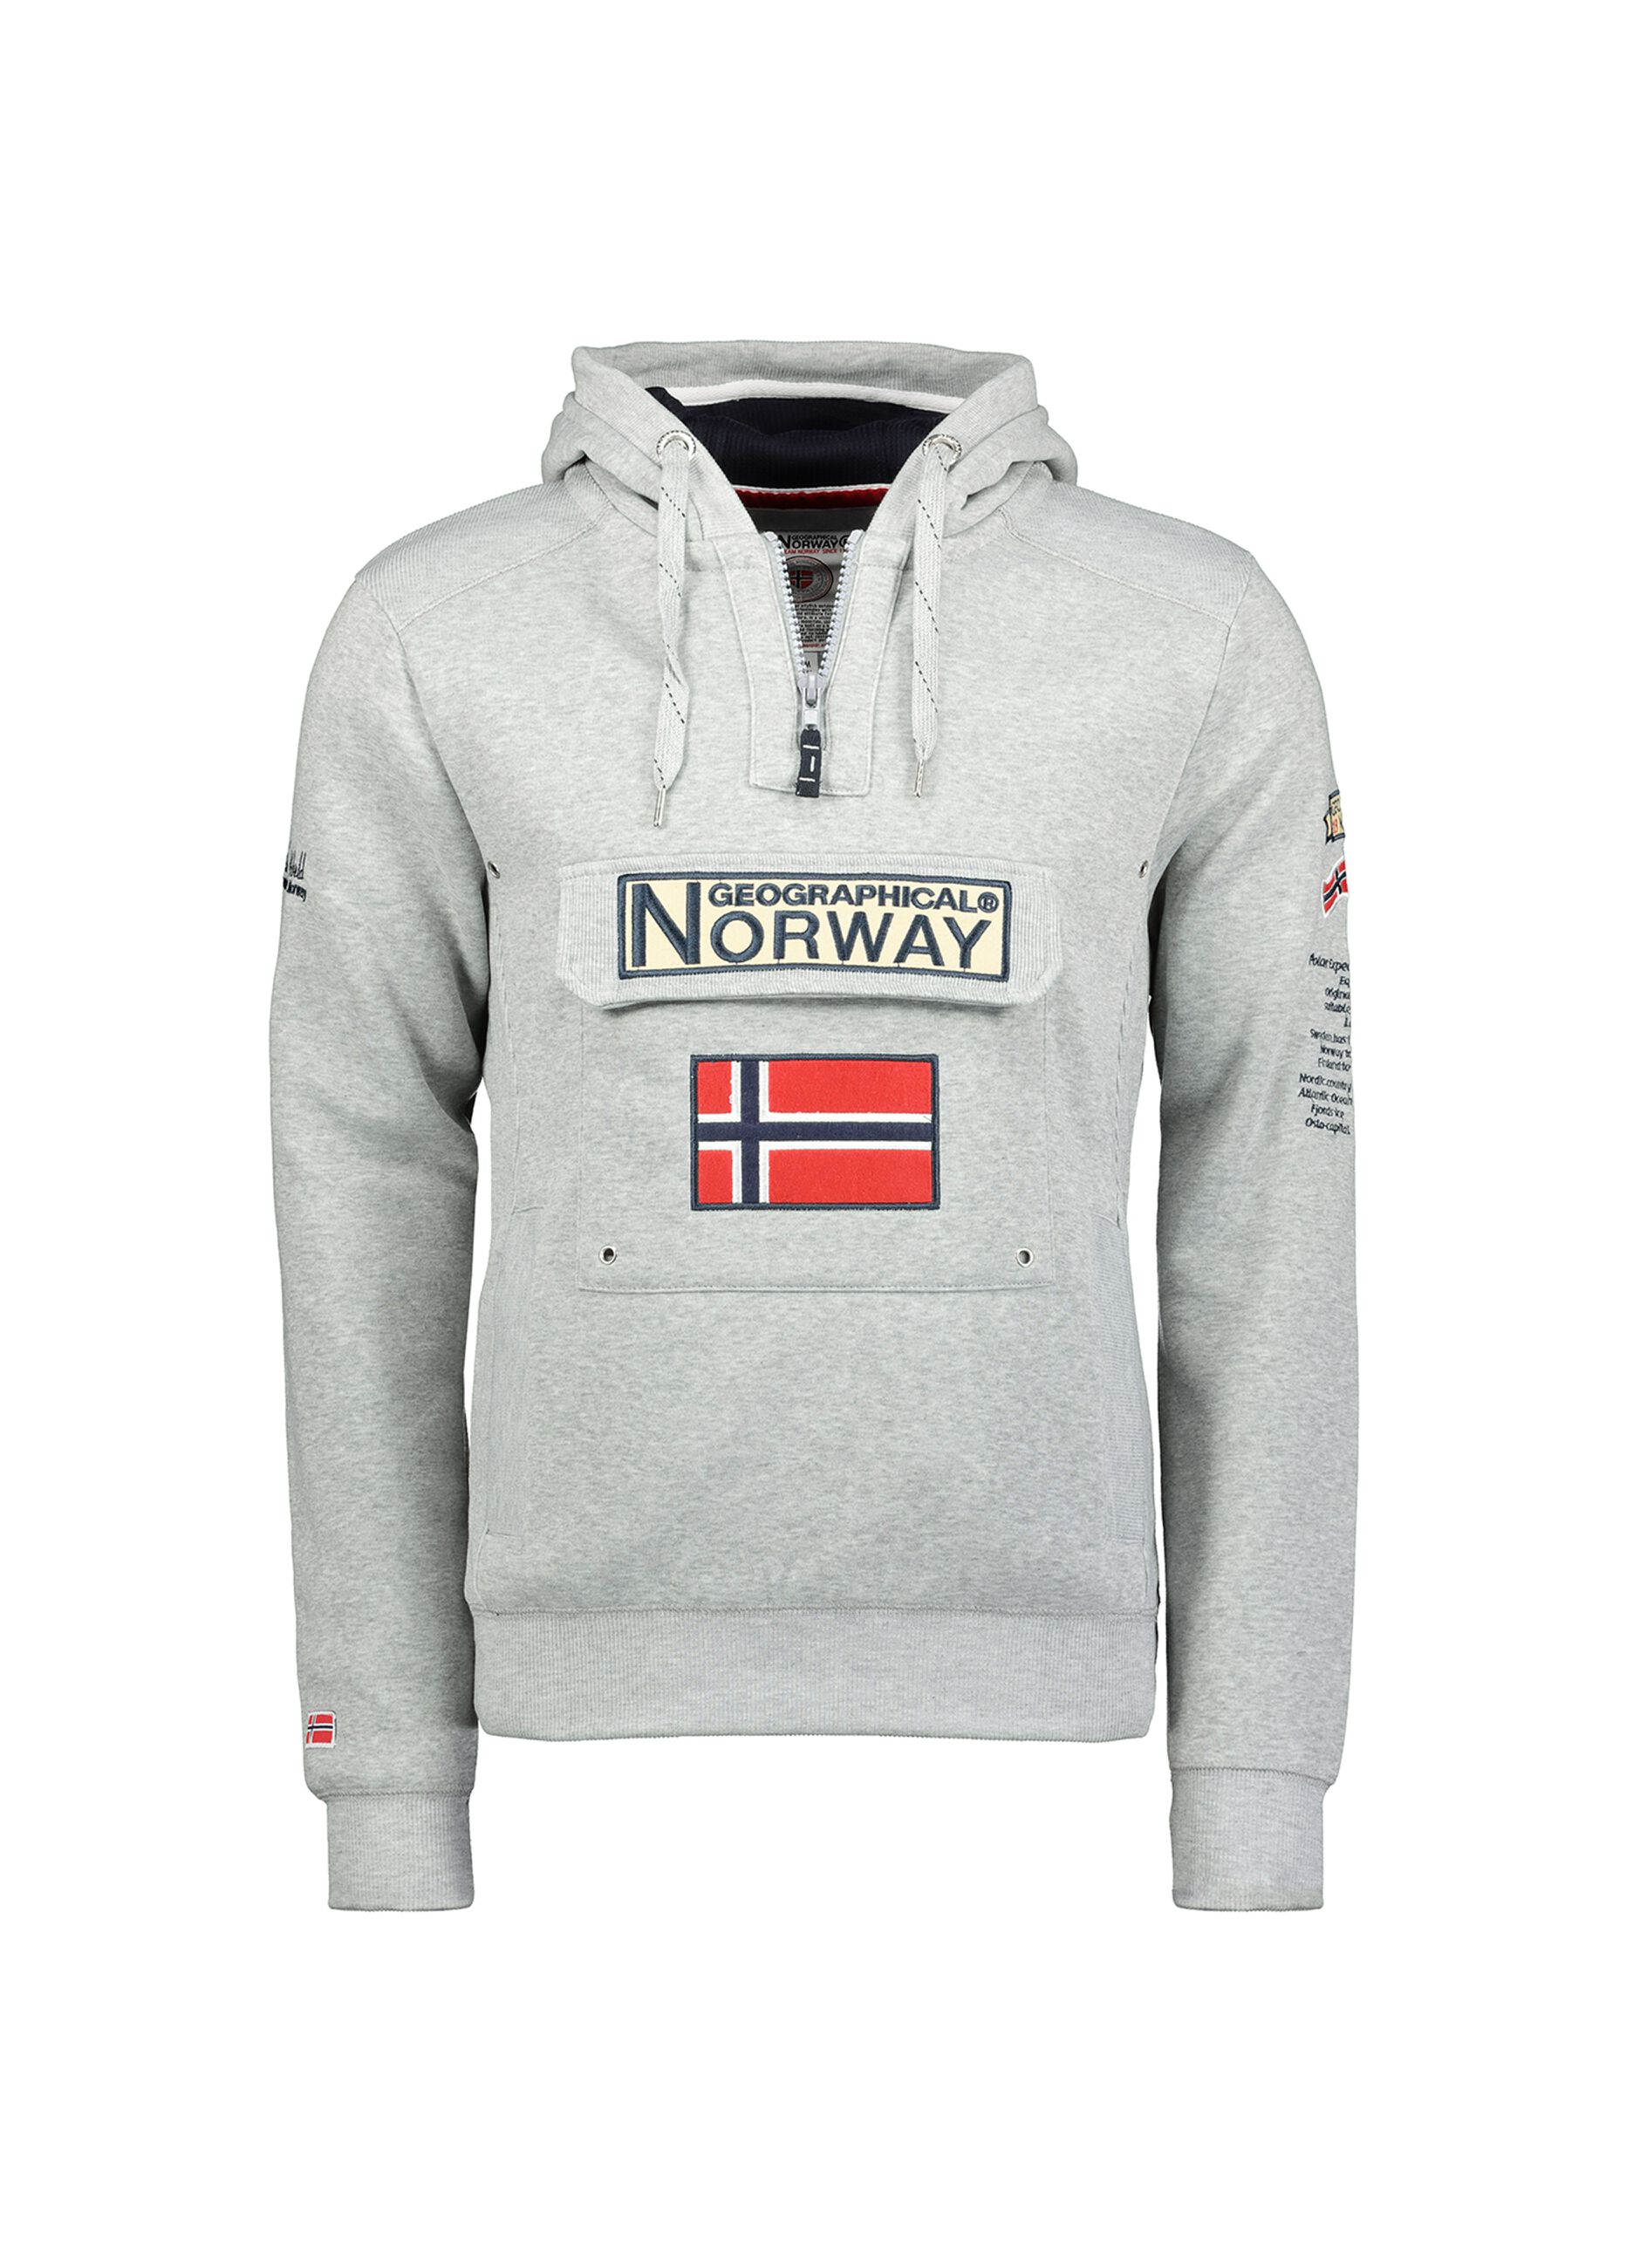 Geographical Norway Jackets and Sweatshirts